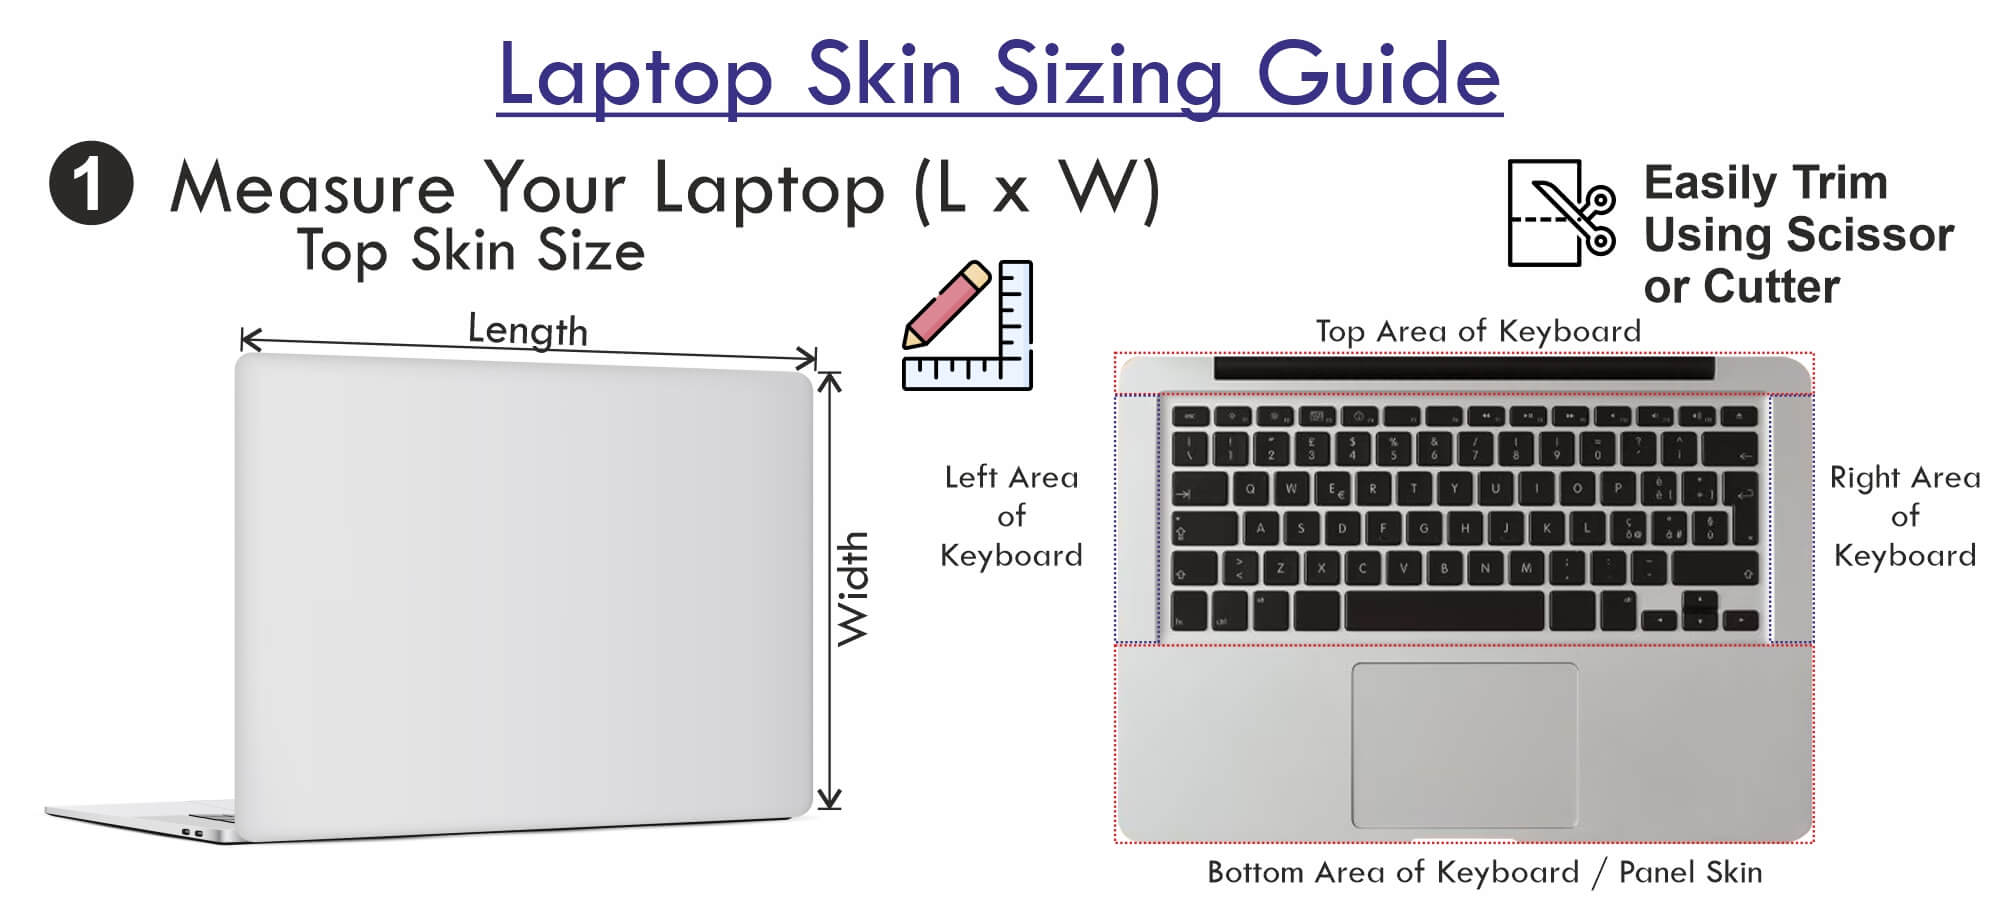 How to Measure Laptop Skin